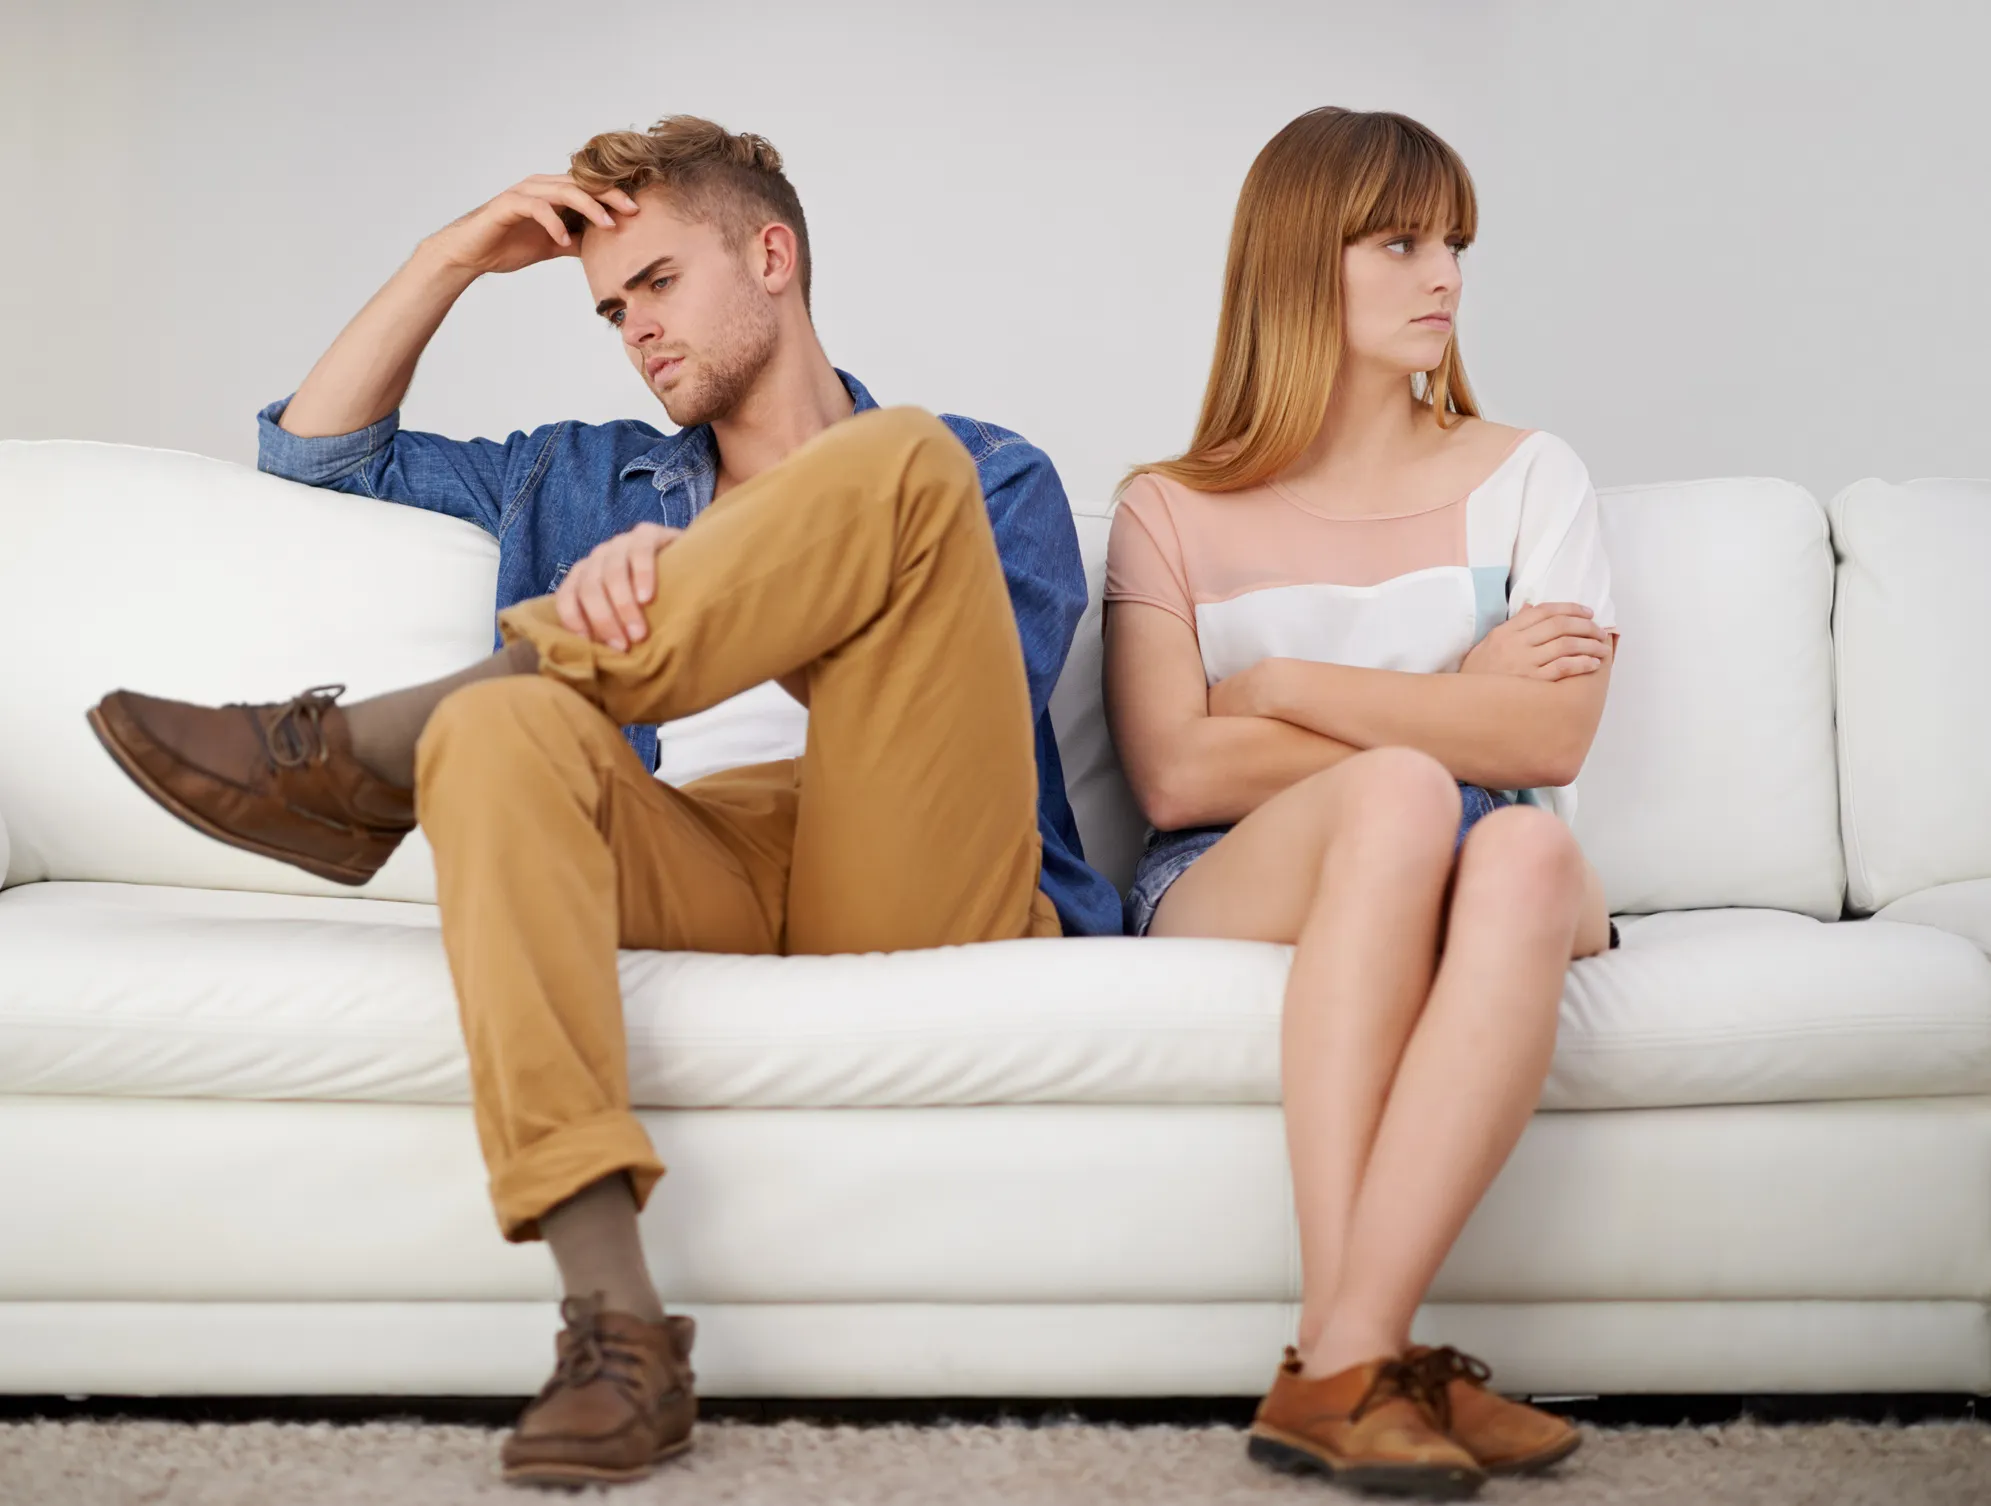 Common Relationship Problems and How to Deal With Them